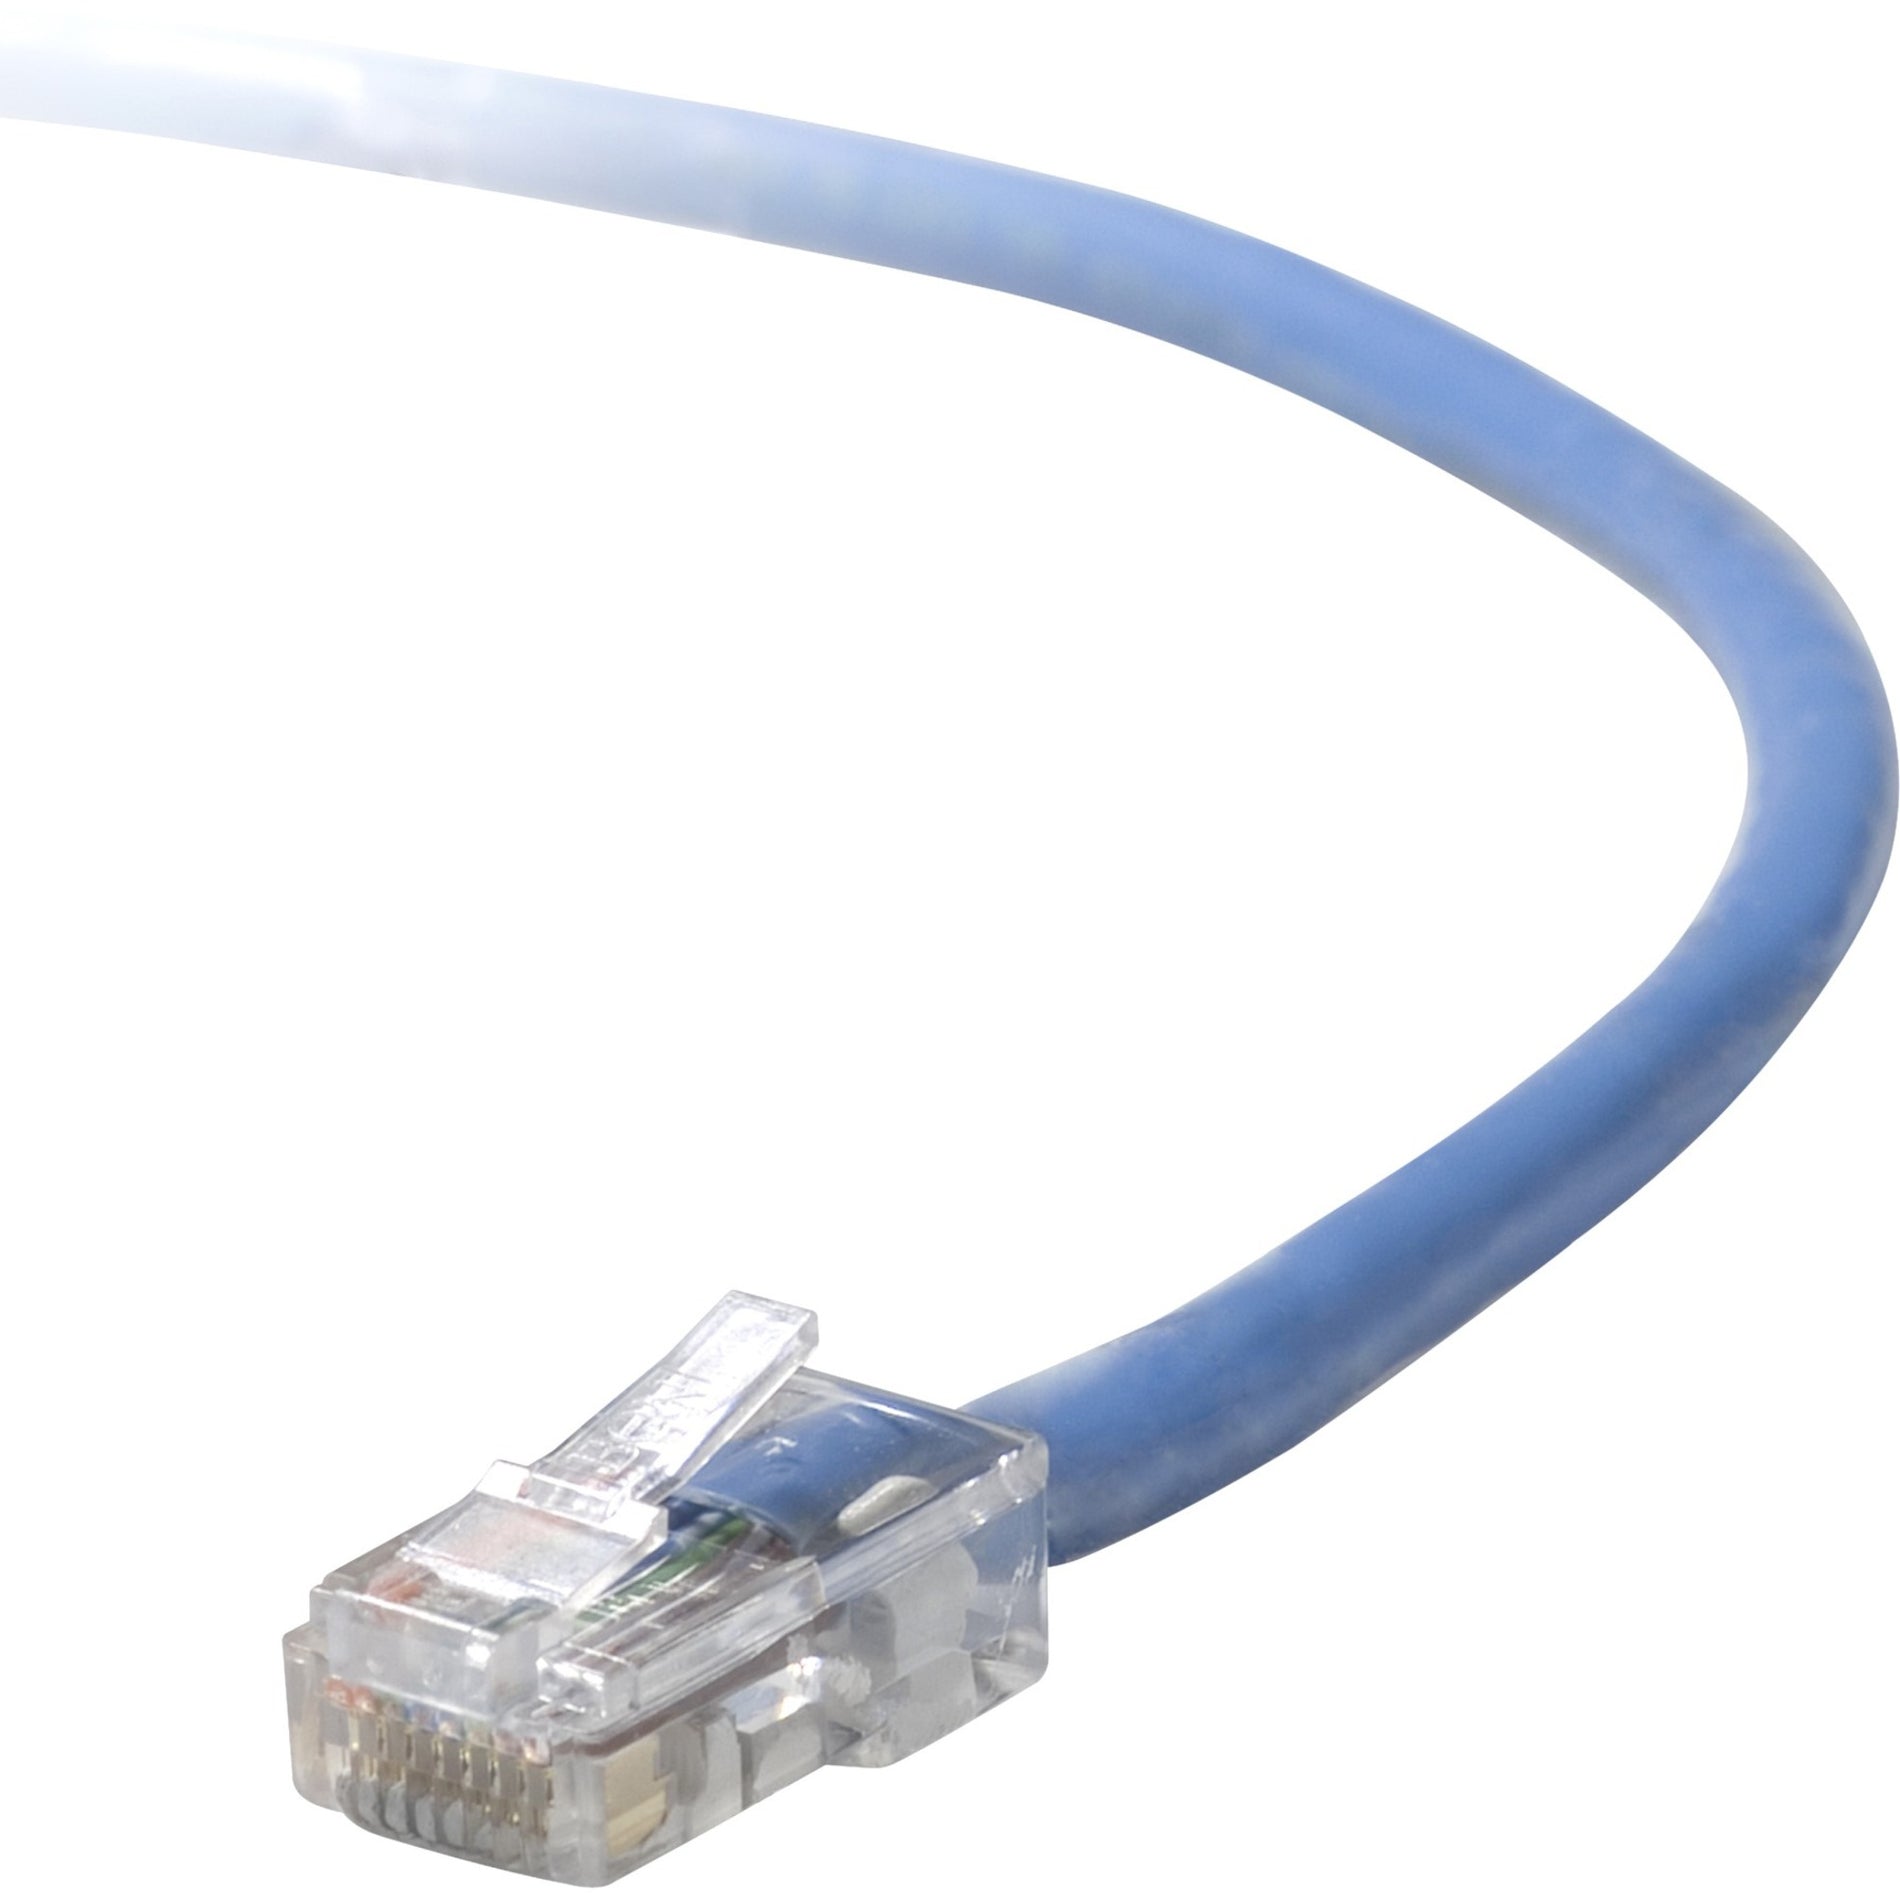 Belkin TAA791-10-BLU-S Category 5e UTP Patch Cable, 10 ft, Snagless, Blue